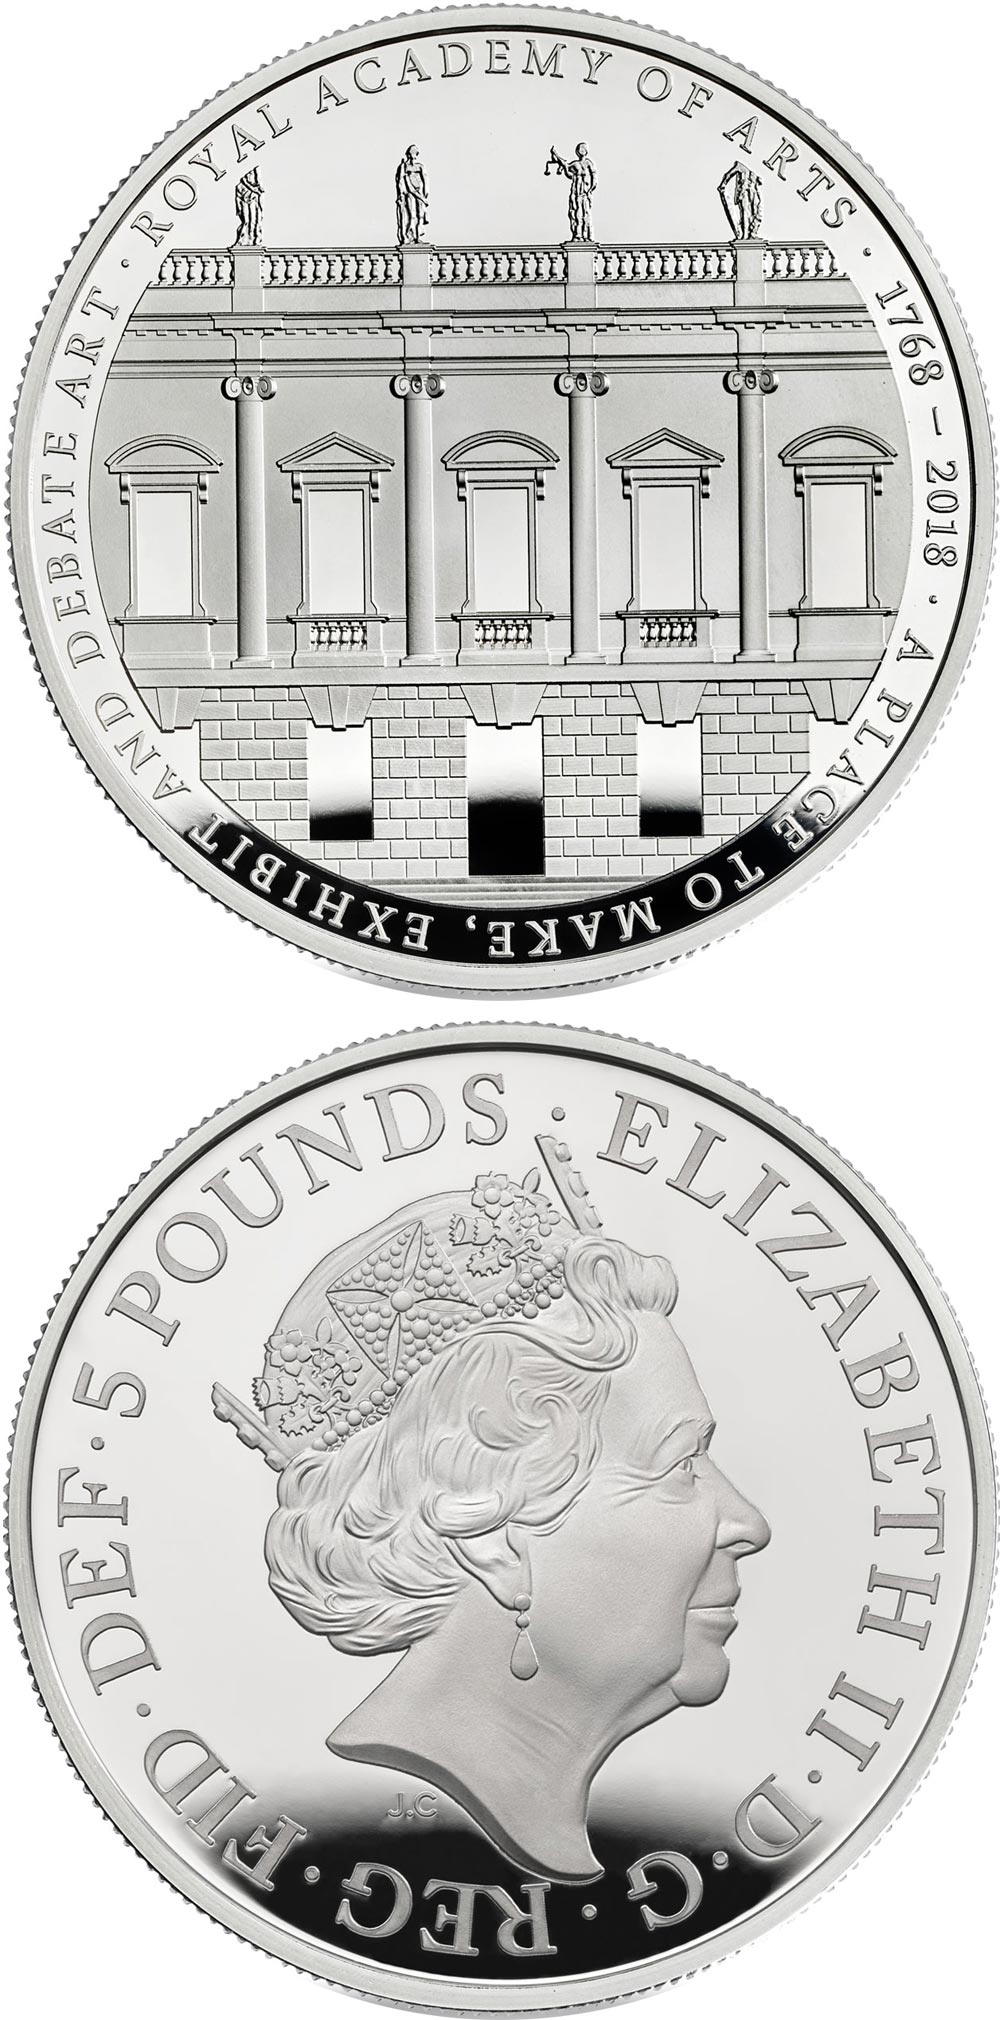 Image of 5 pounds coin - 250th Anniversary of Royal Academy | United Kingdom 2018.  The Silver coin is of Proof quality.